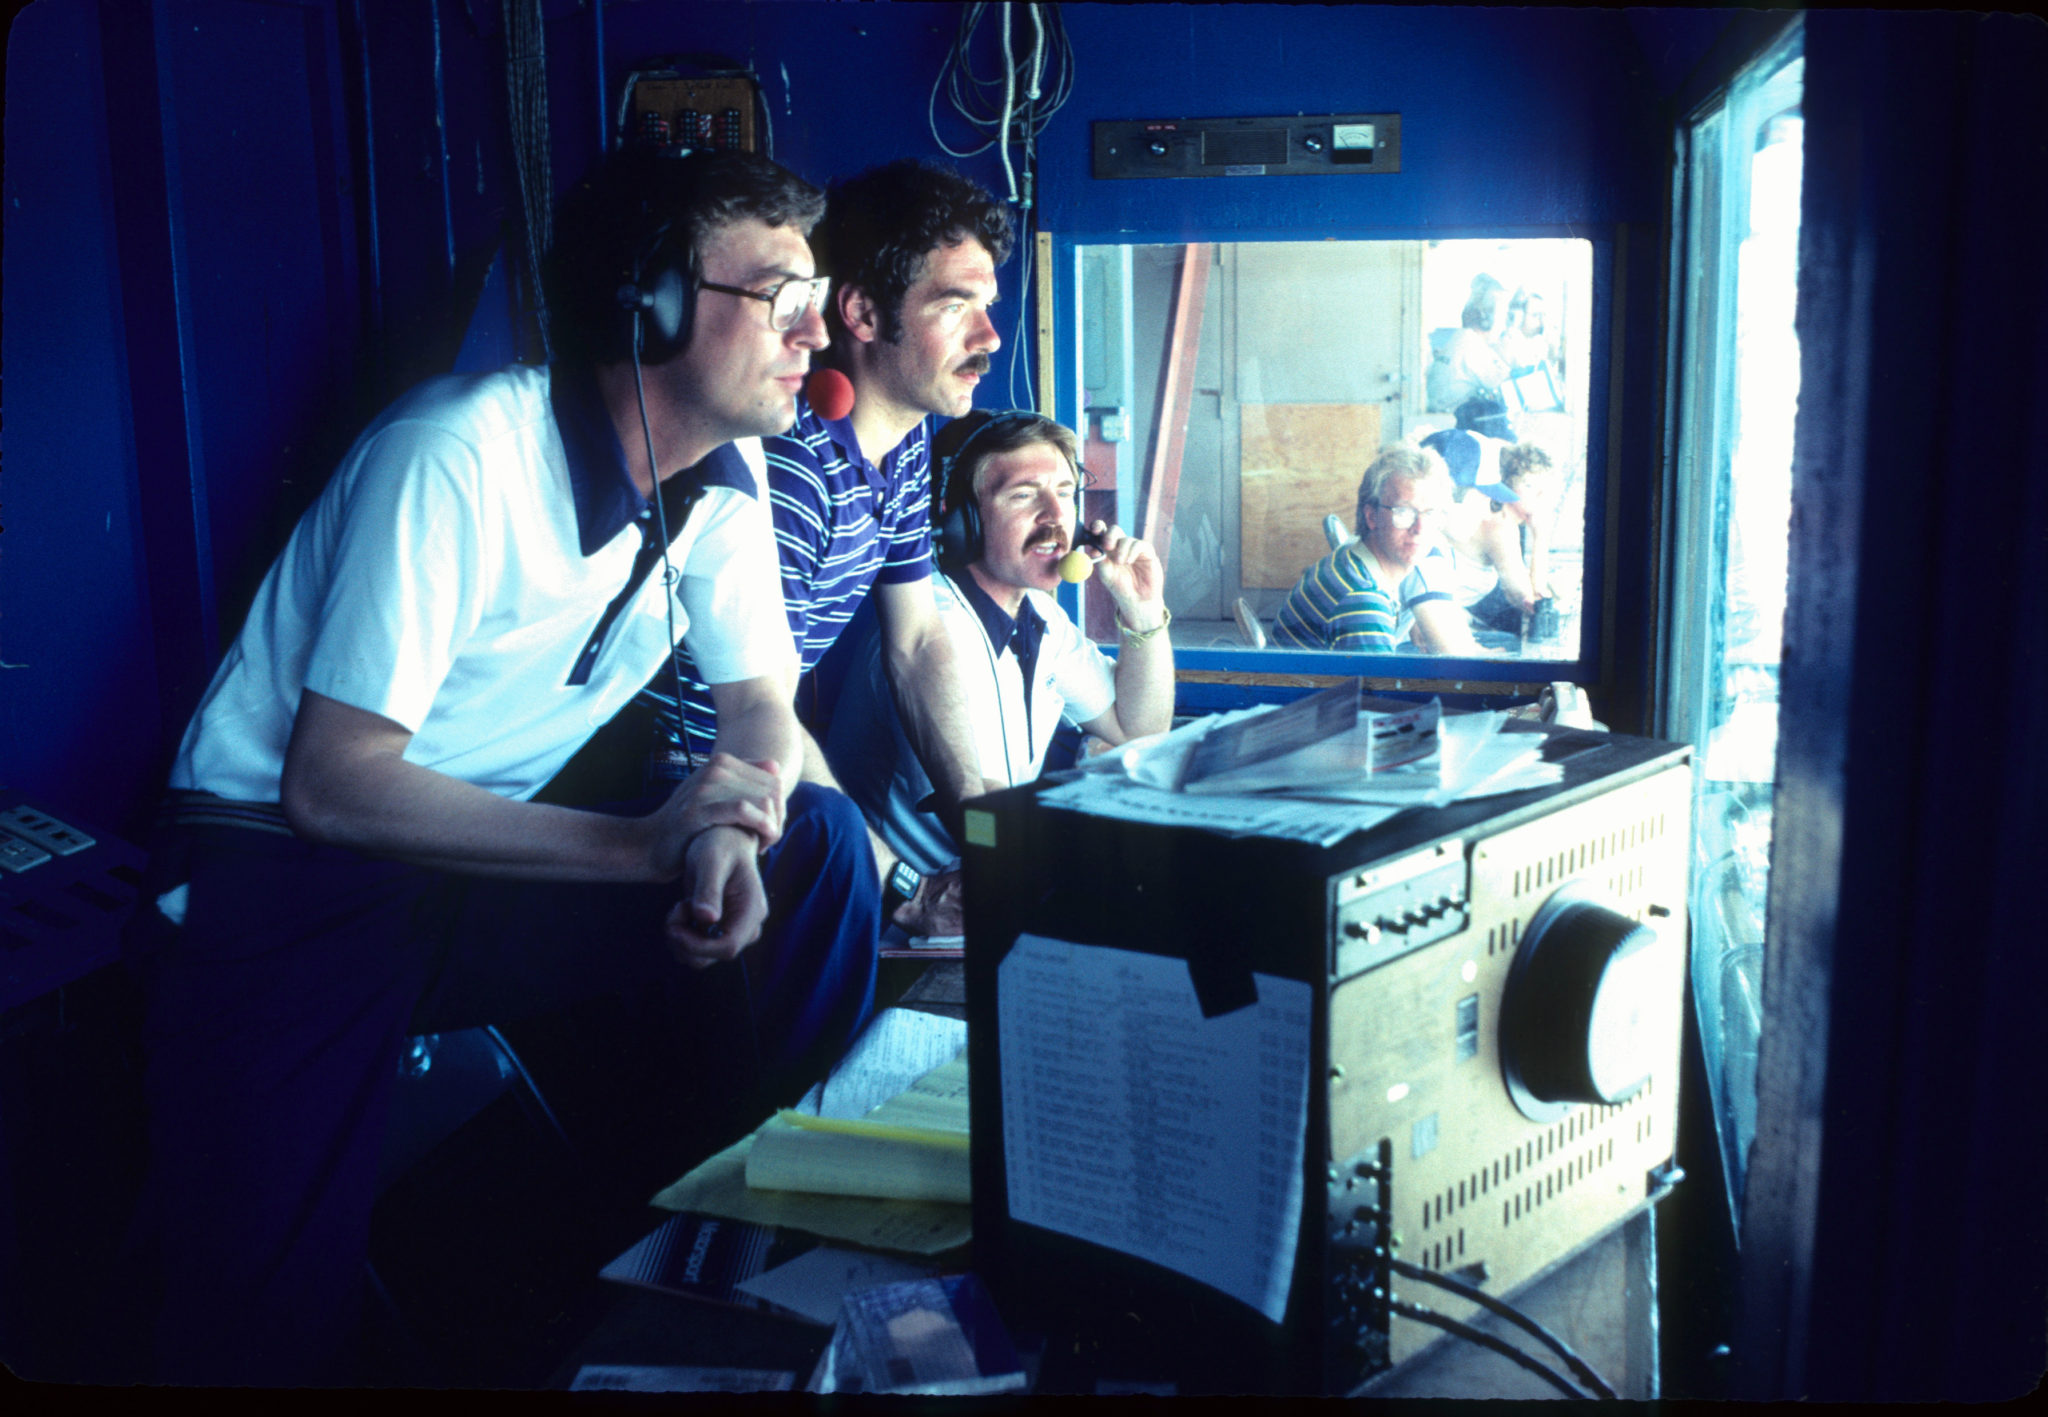 Uniquely, Bob Jenkins meshed with any broadcasting colleague like the late Larry Nuber. (Photo: ESPN Images)